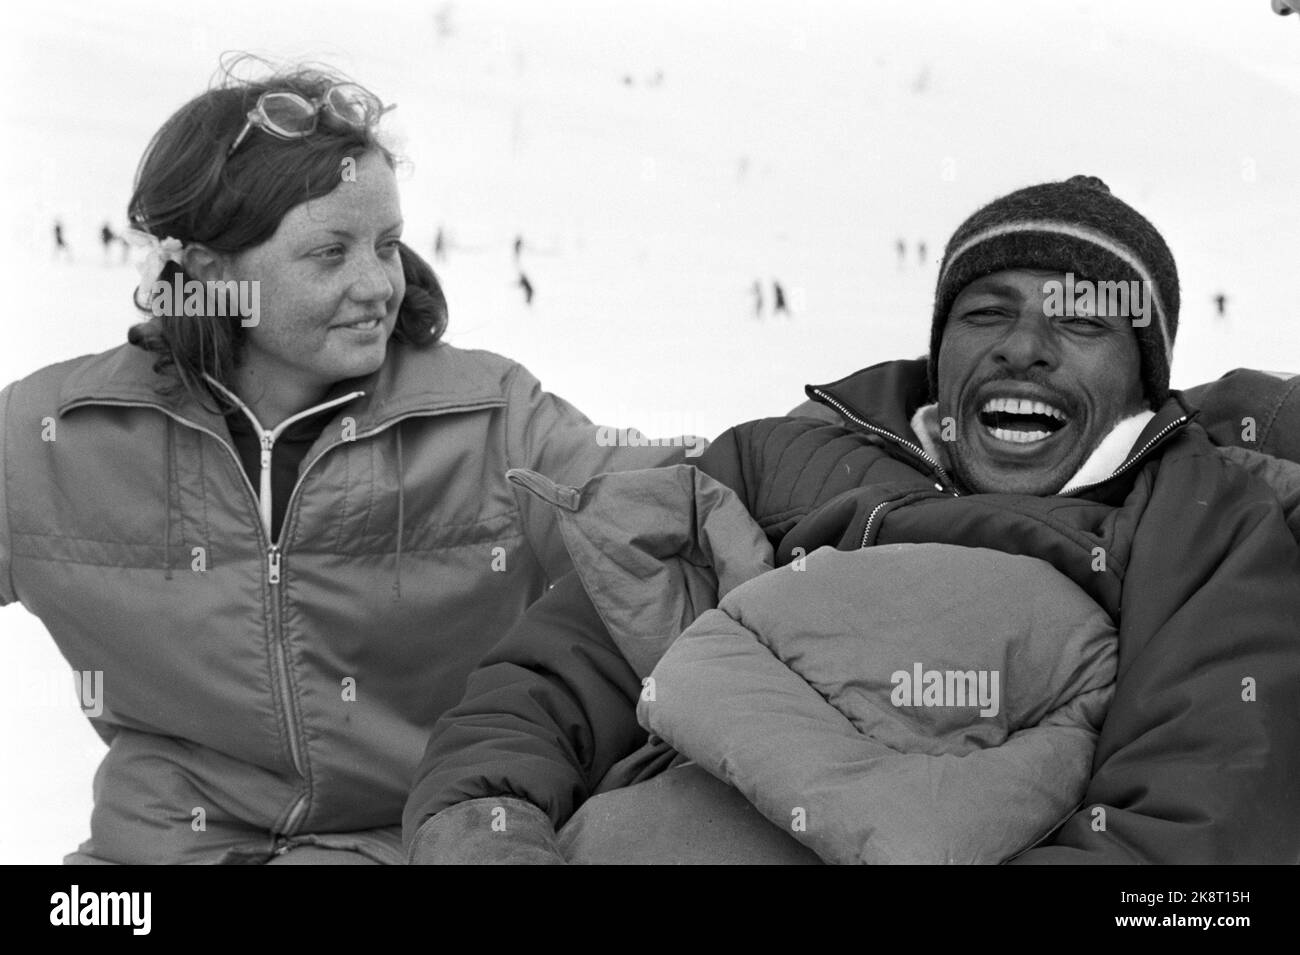 Beitostølen 1971 Abebe Bikila from Ethiopia, twice Olympic champion in the marathon, visits Beitostølen after an invitation from Erling Stordahl. He became paralyzed after a car accident three years ago. He won his class in wooden teams in dog sledding. Here he is with the interpreter, Gunilla Forsmark. Photo: Ivar Aaserud / Current / NTB  newly Stock Photo